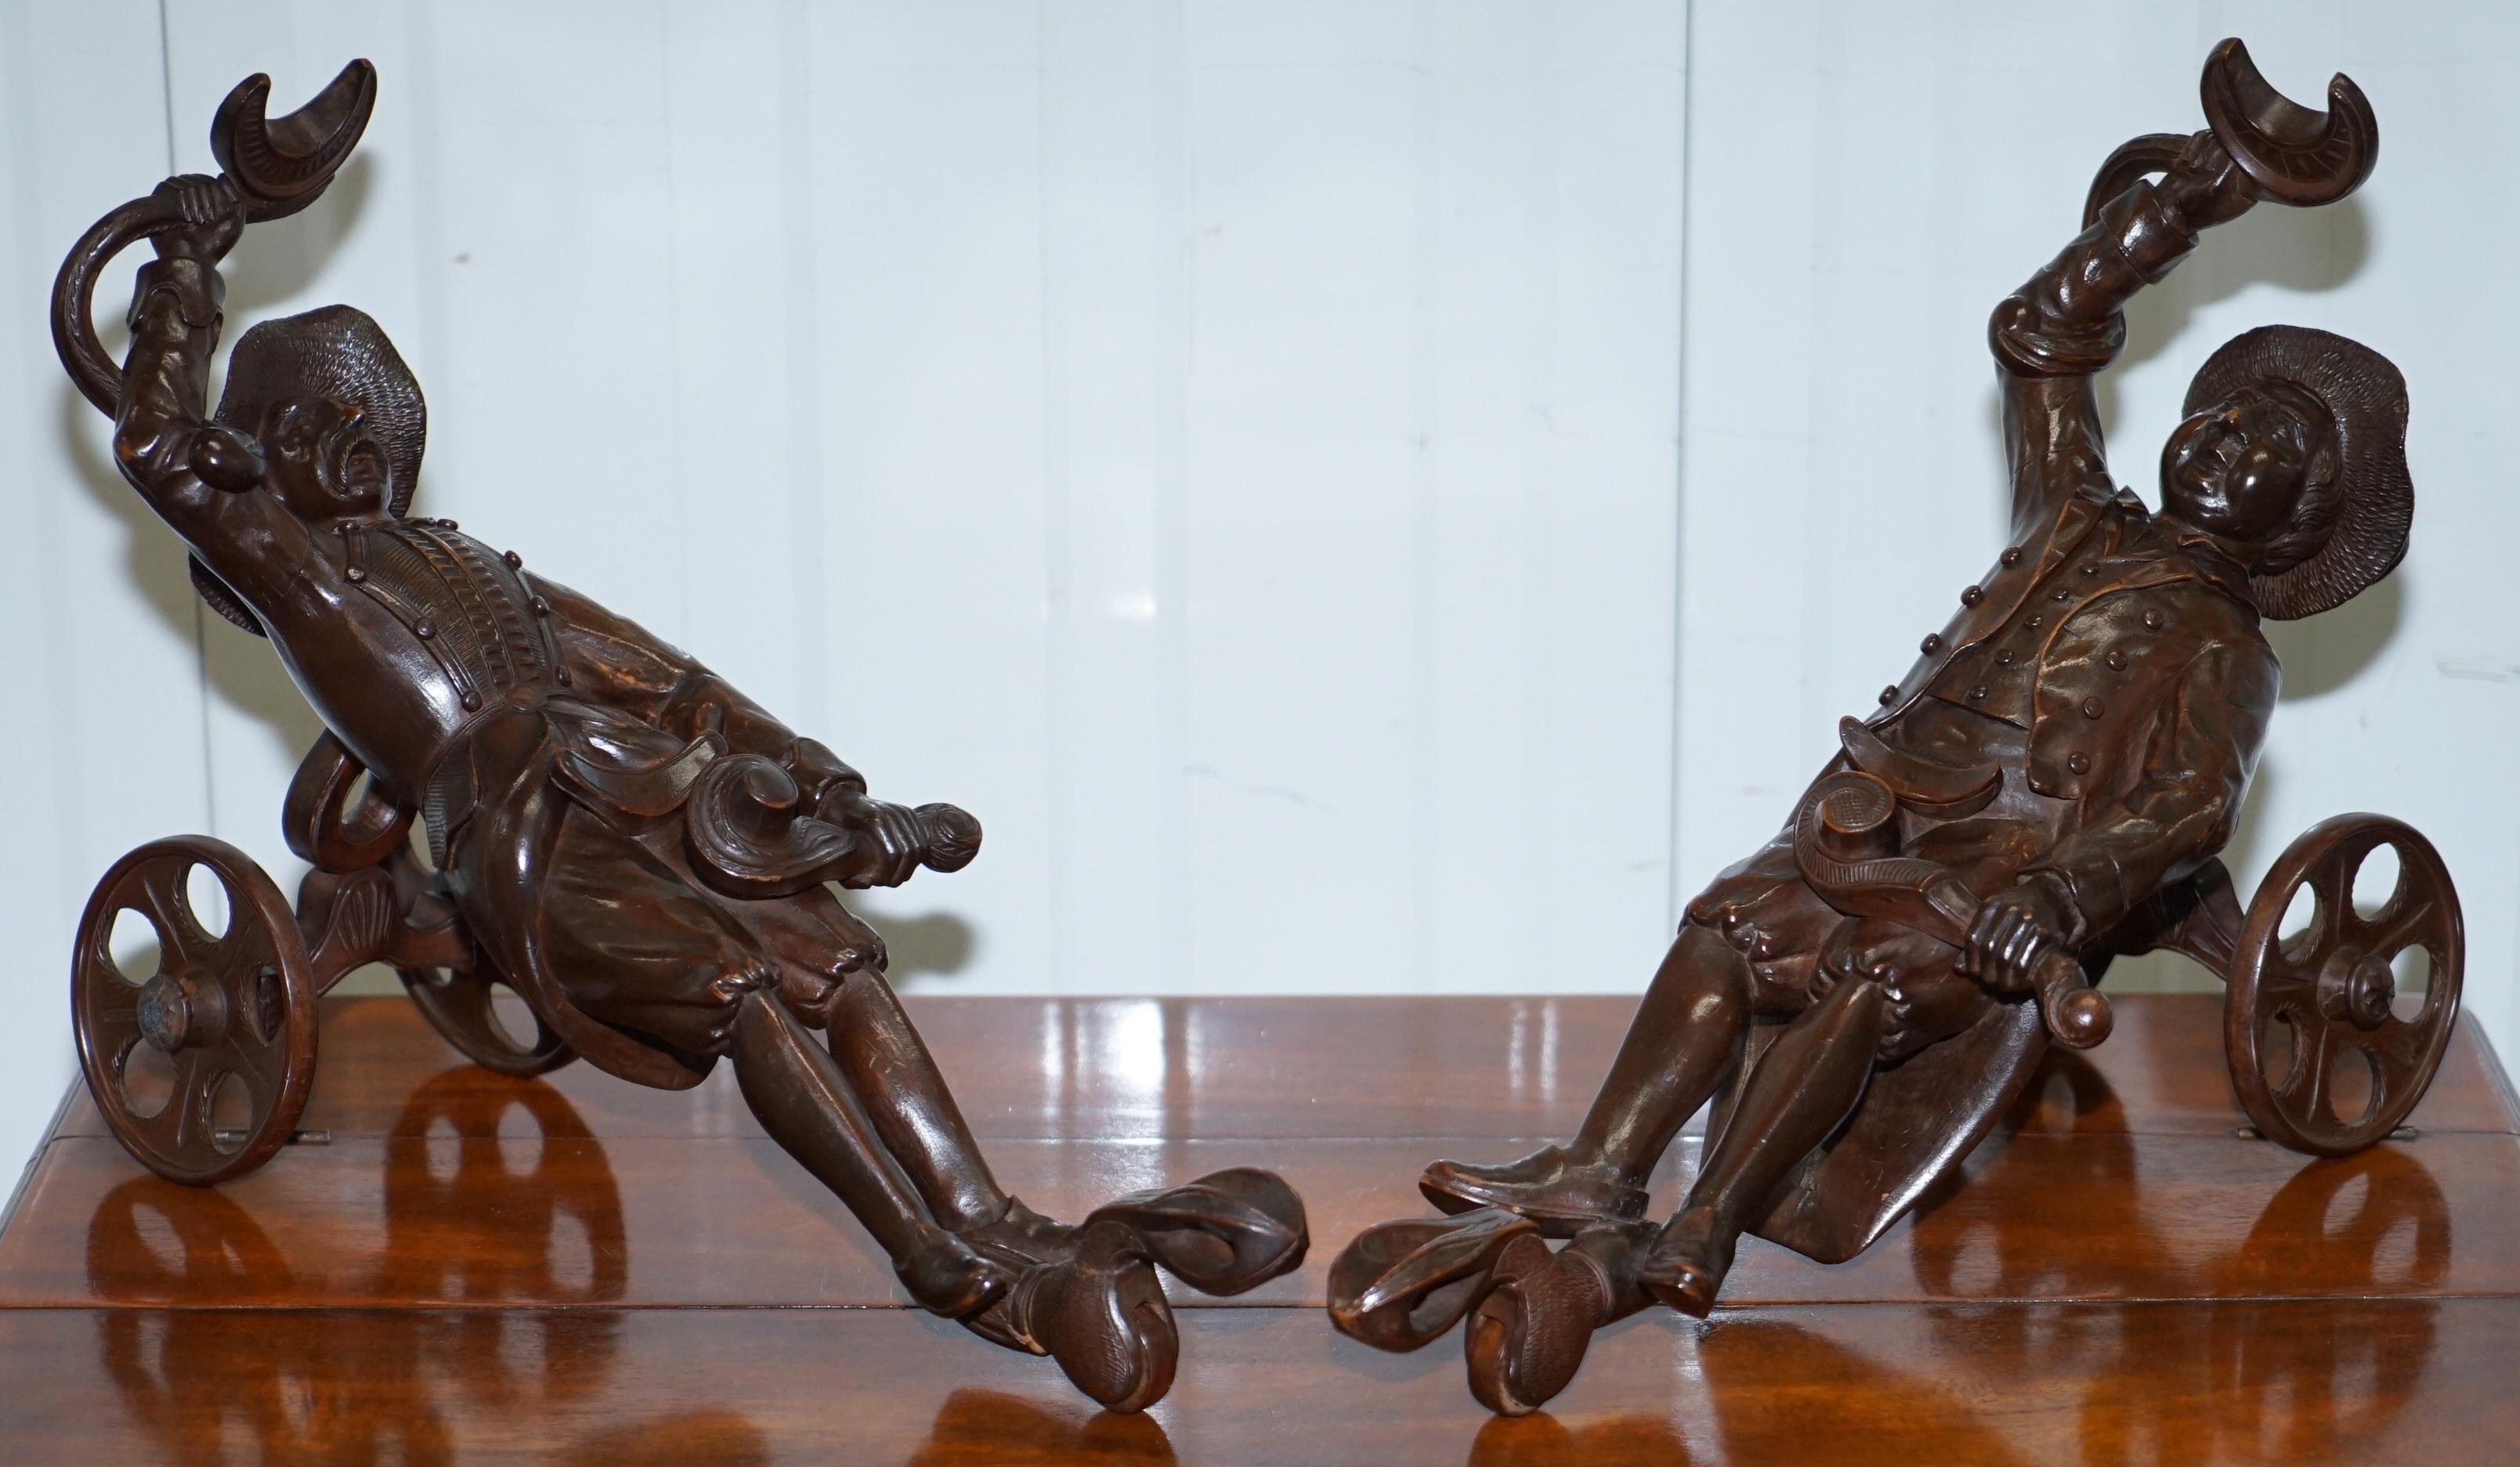 We are delighted to offer for sale this lovely pair of original Brienz Switzerland black forest wood hand carved 19th century wine bottle holders

This pair are exquisite from top to bottom, the carving is obviously done by a master craftsman, we